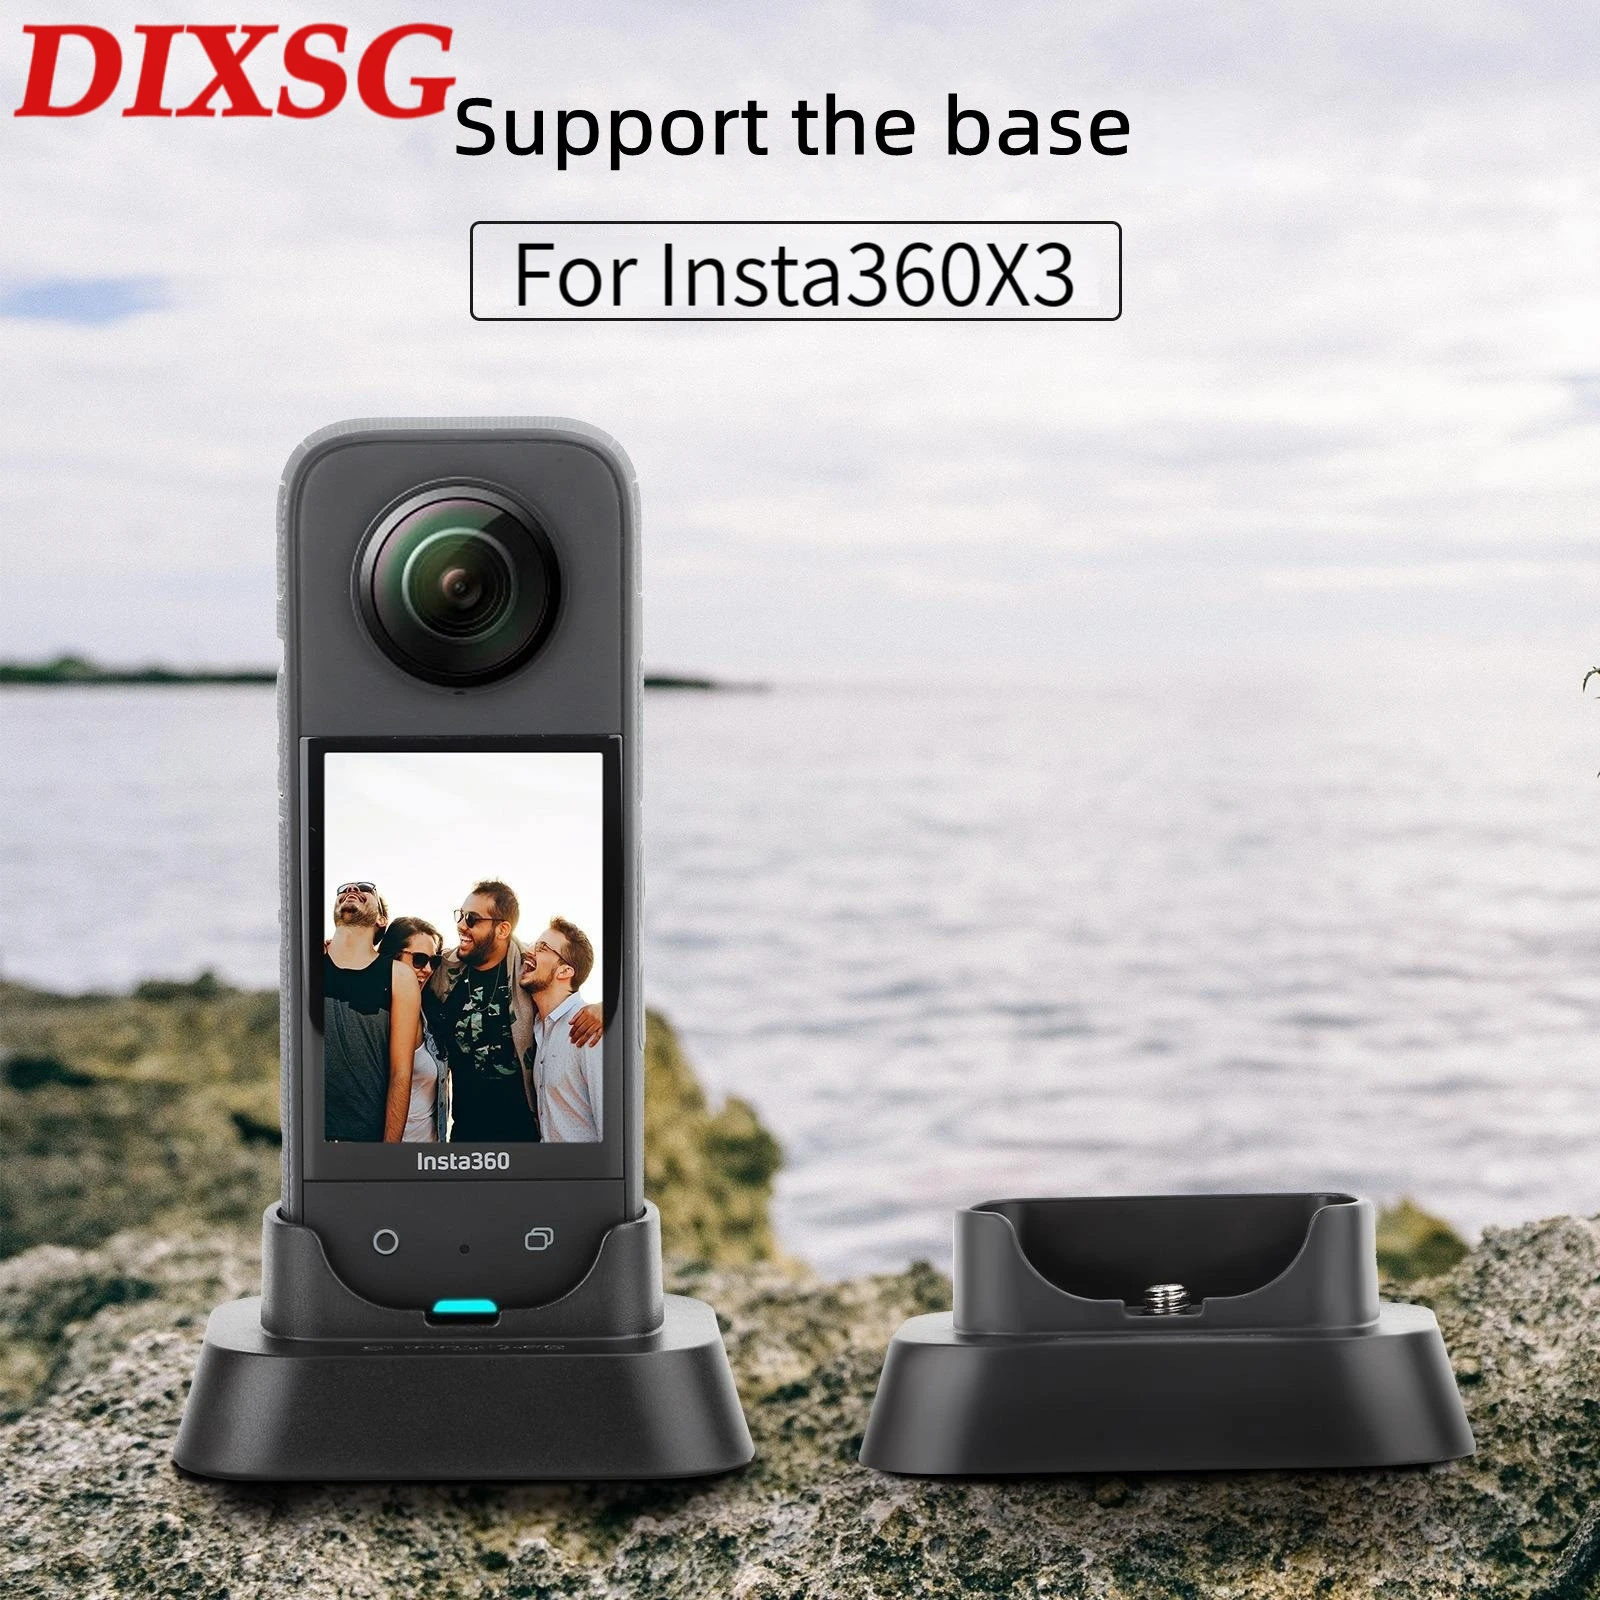 Film Panoramic Camera Desktop Support Upright For Insta360 X3 Base Accessories Beautiful Simplicity Can Be Fixed Installation